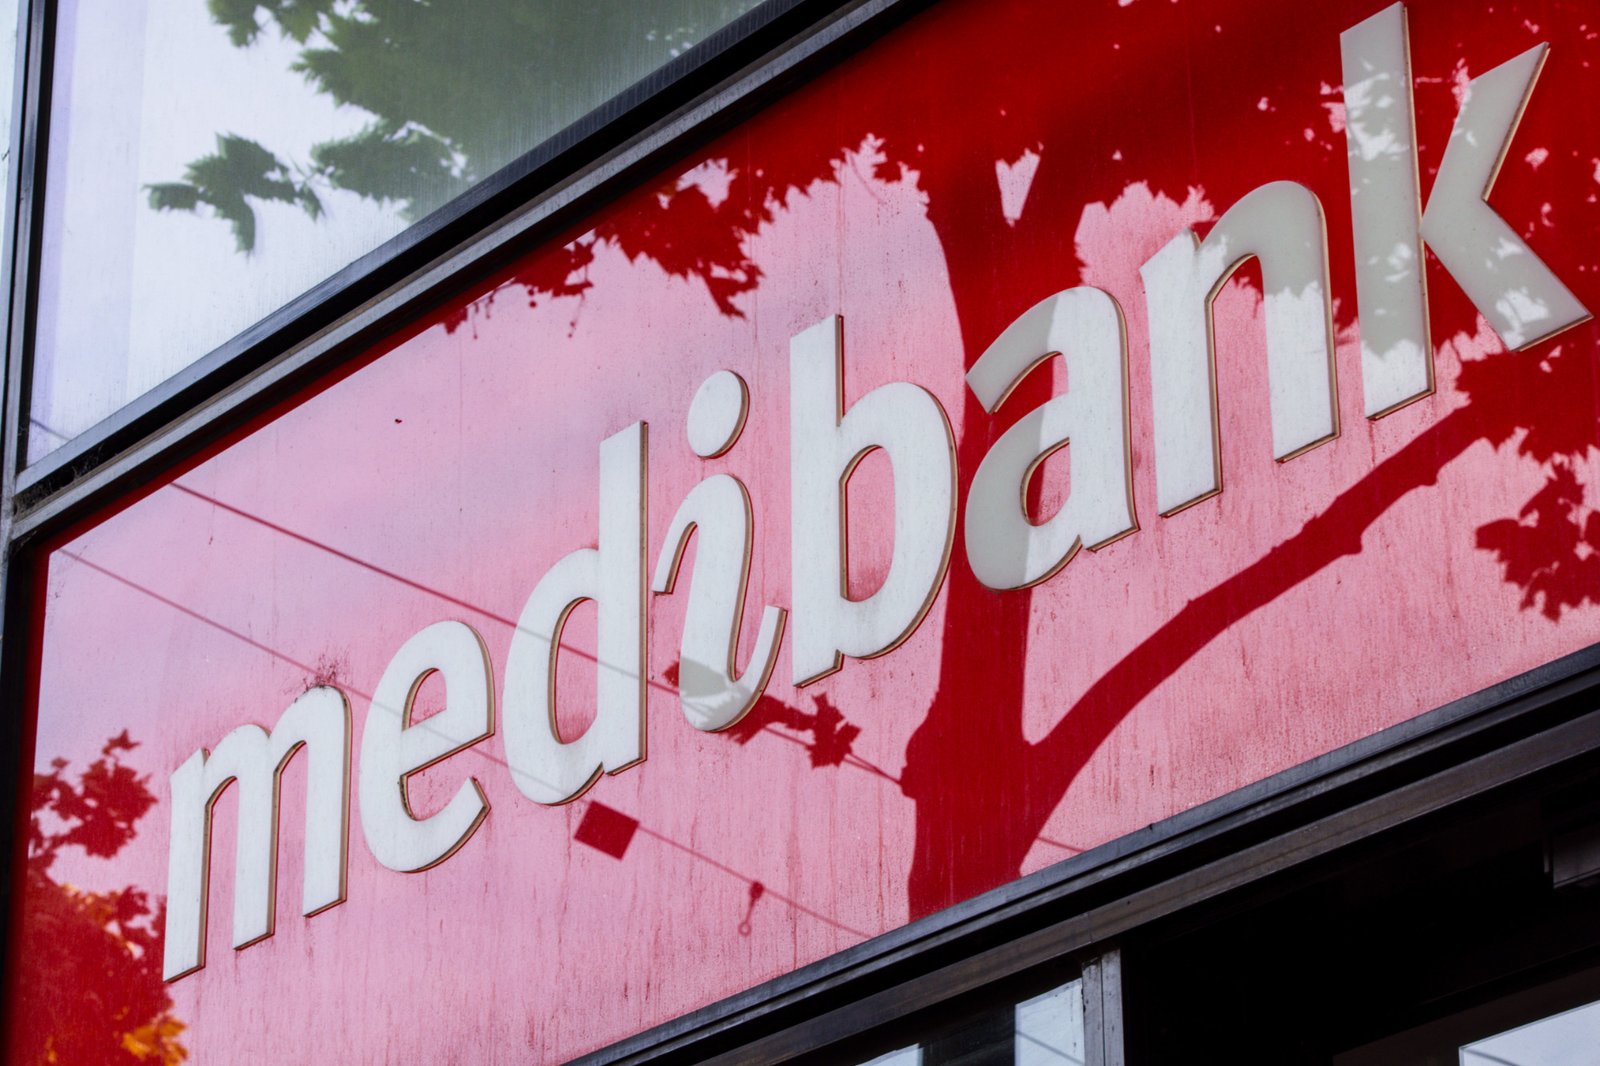 Medibank hackers are now releasing stolen data on the dark web. If you